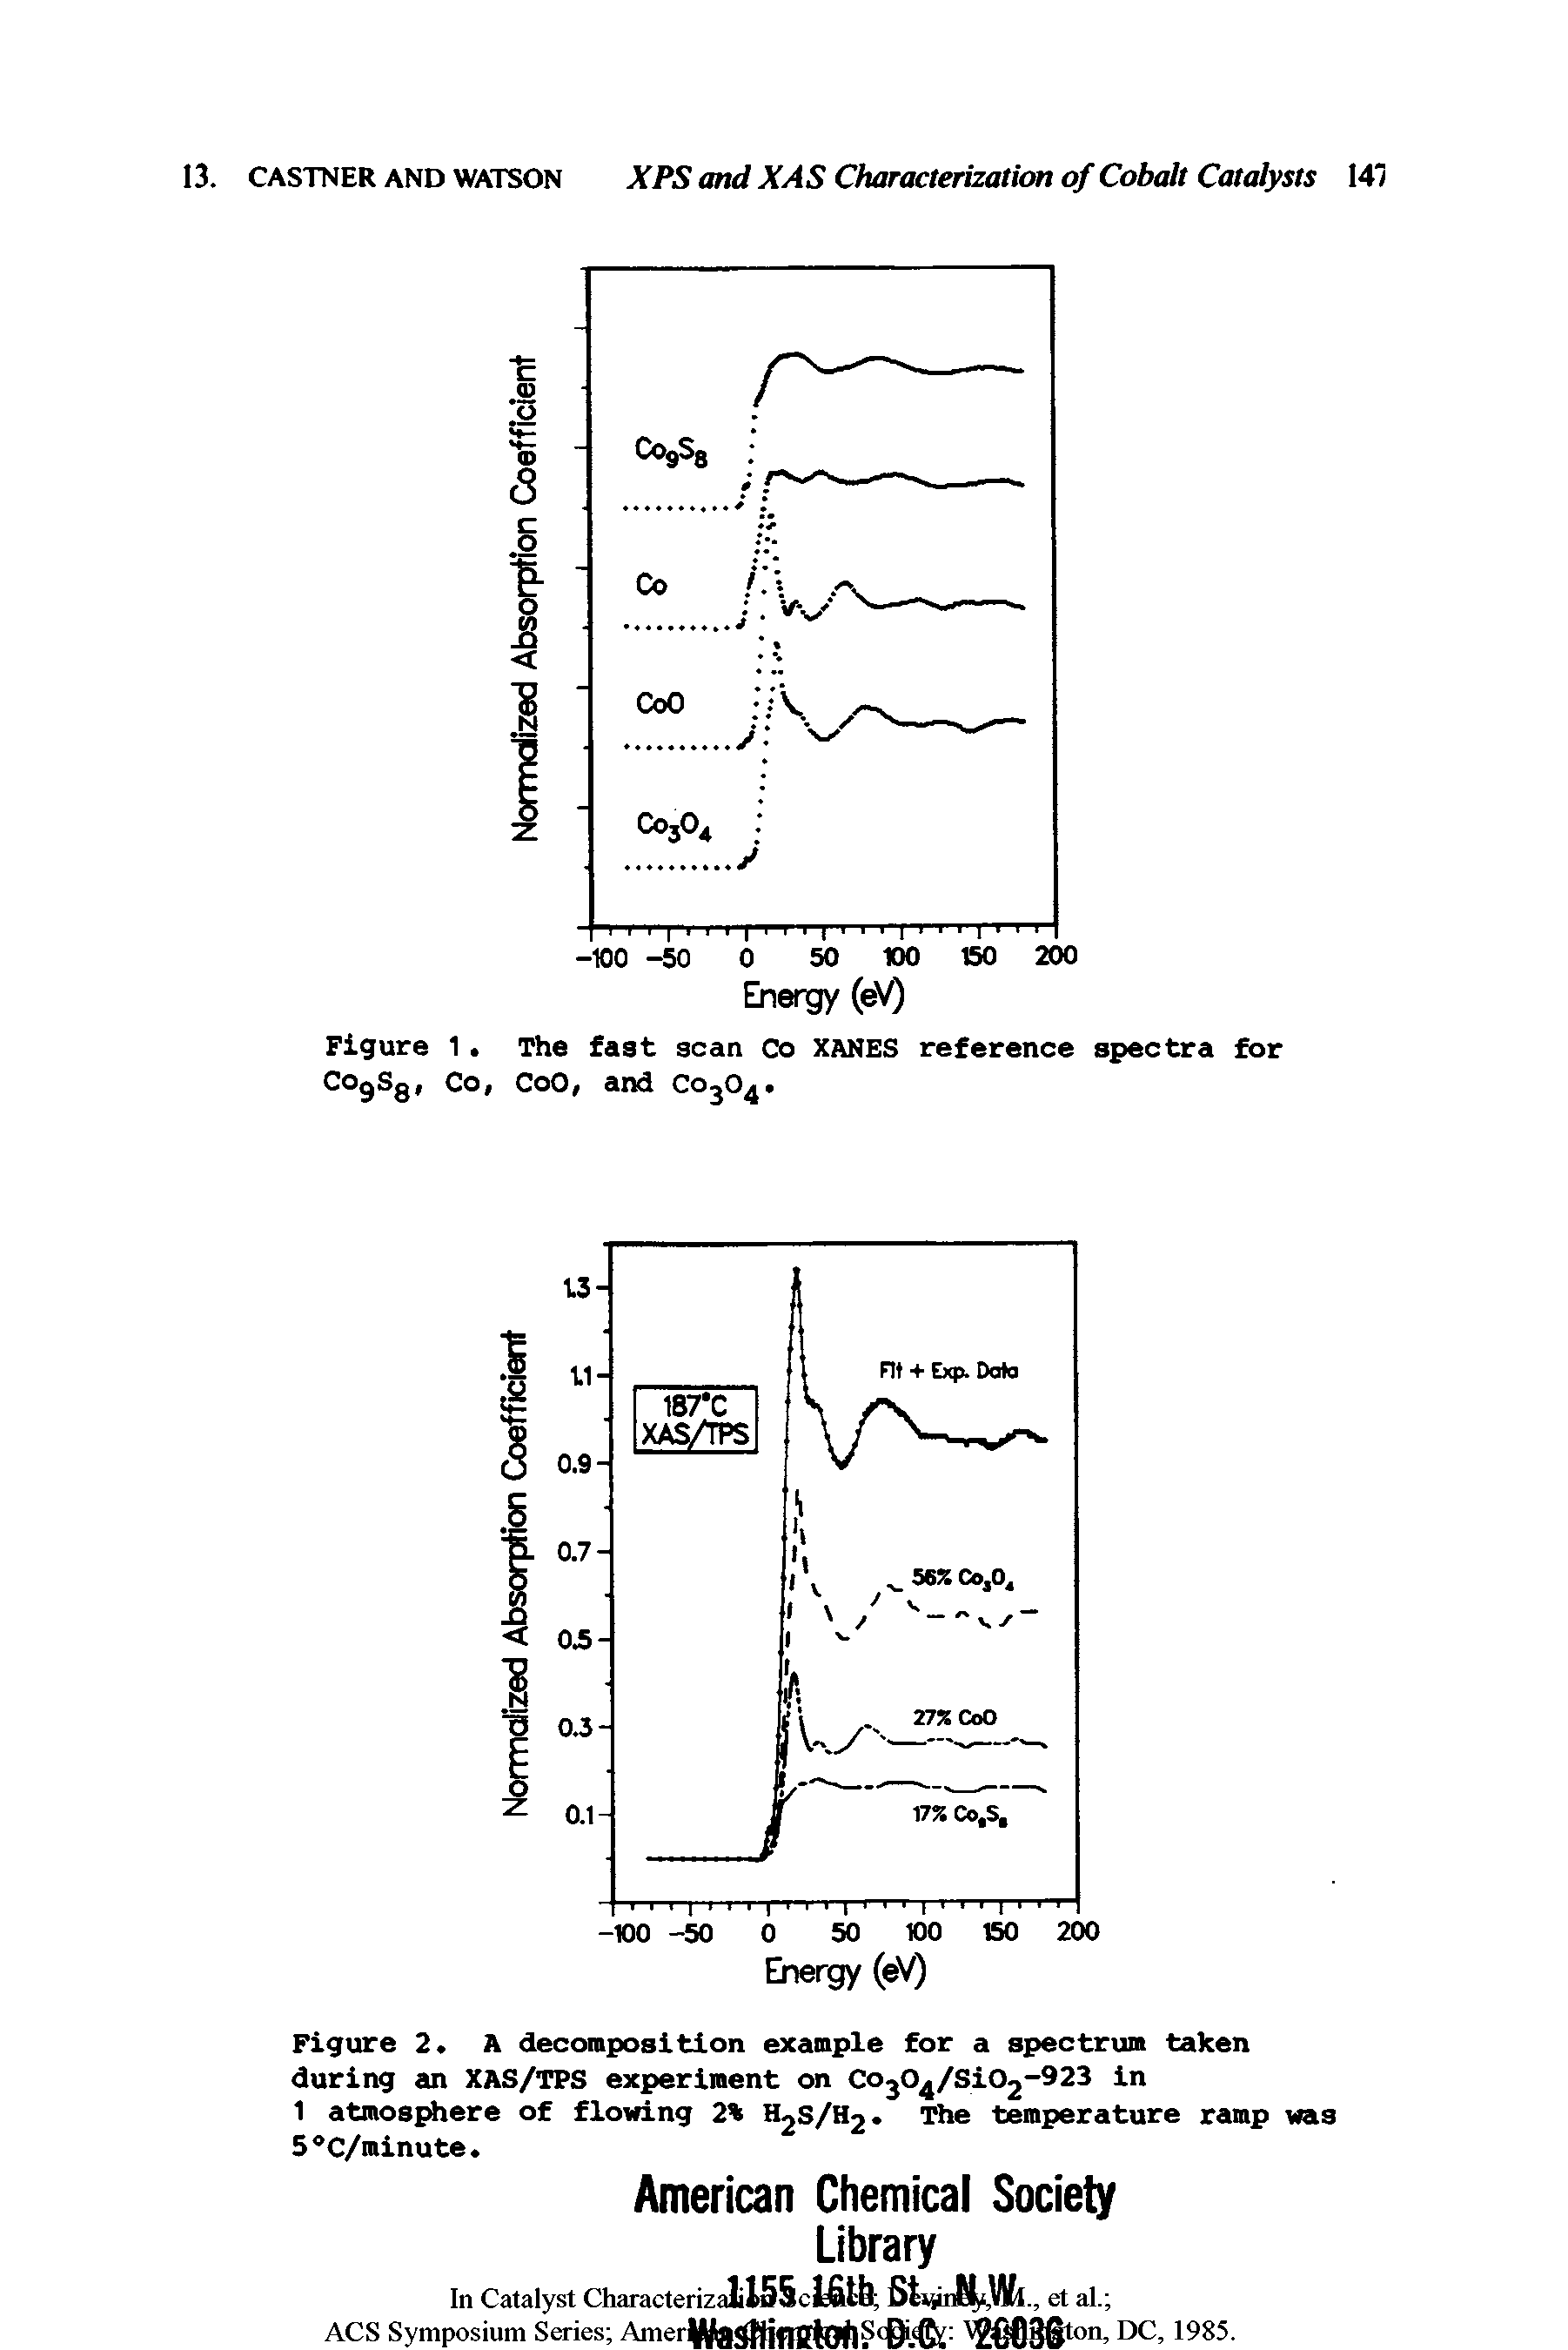 Figure 2. A decomposition example for a spectrum taken during an XAS/TPS experiment on Co20 /Si02-923 in 1 atmosphere of flowing 2% H2S/H2. The temperature ramp was 5 C/minute.